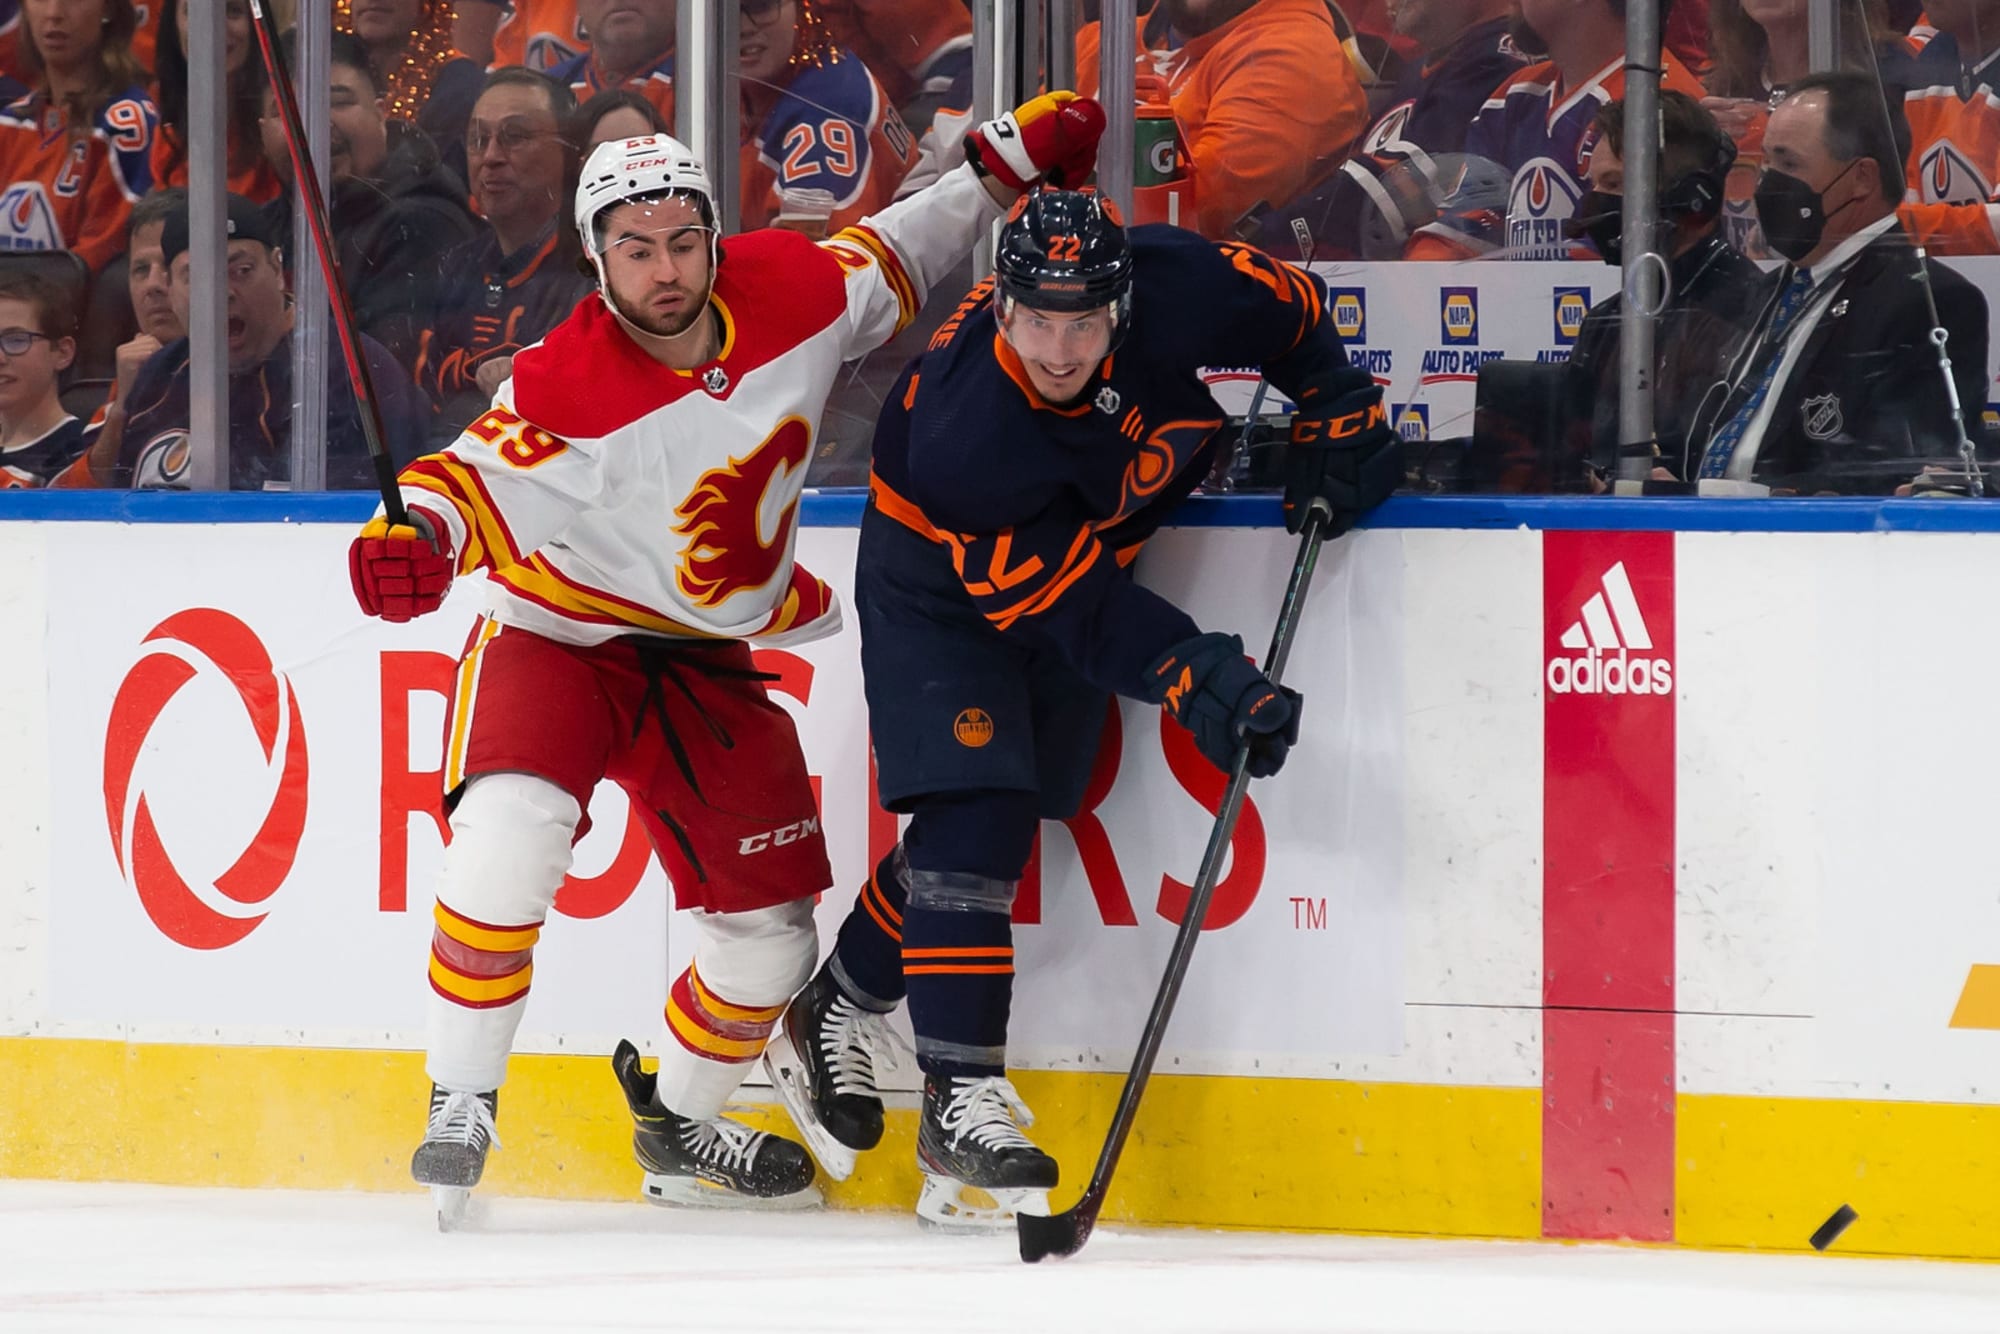 Edmonton Oilers Vs Flames Date, Time, Streaming, Betting Odds, More